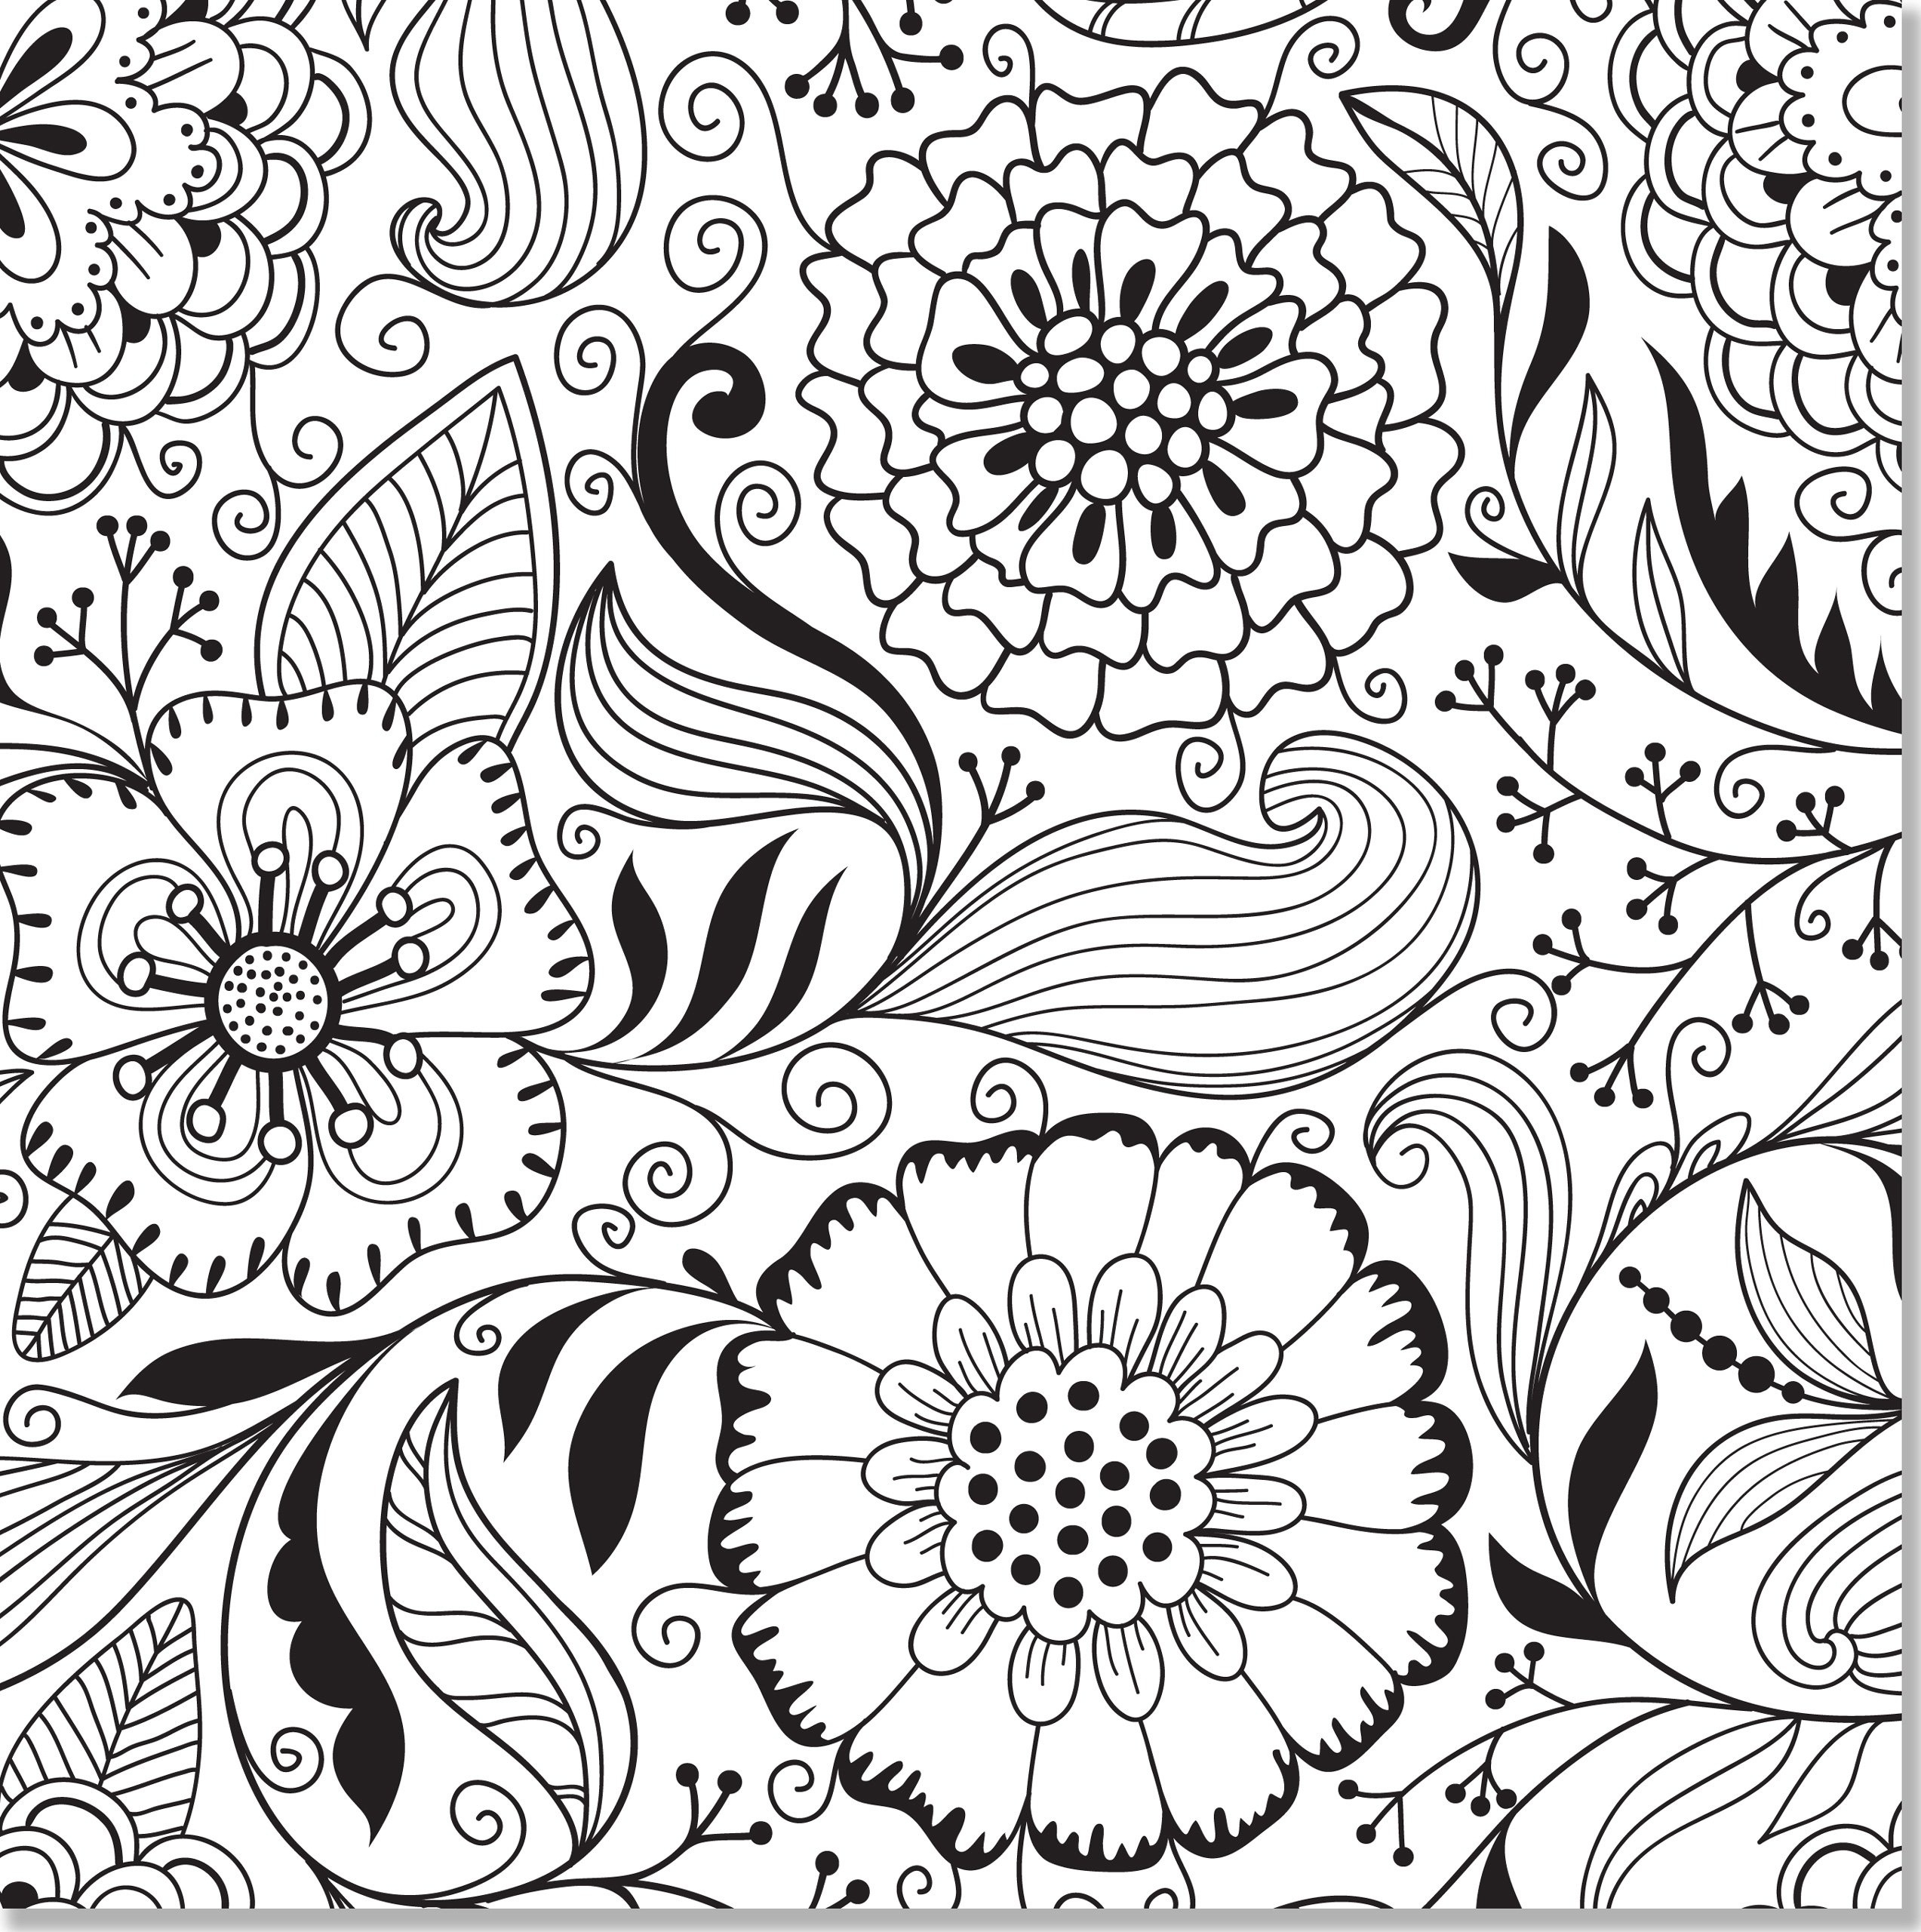 Coloring Pages Ideas: Coloring Designs For Adults Circle Free - Free